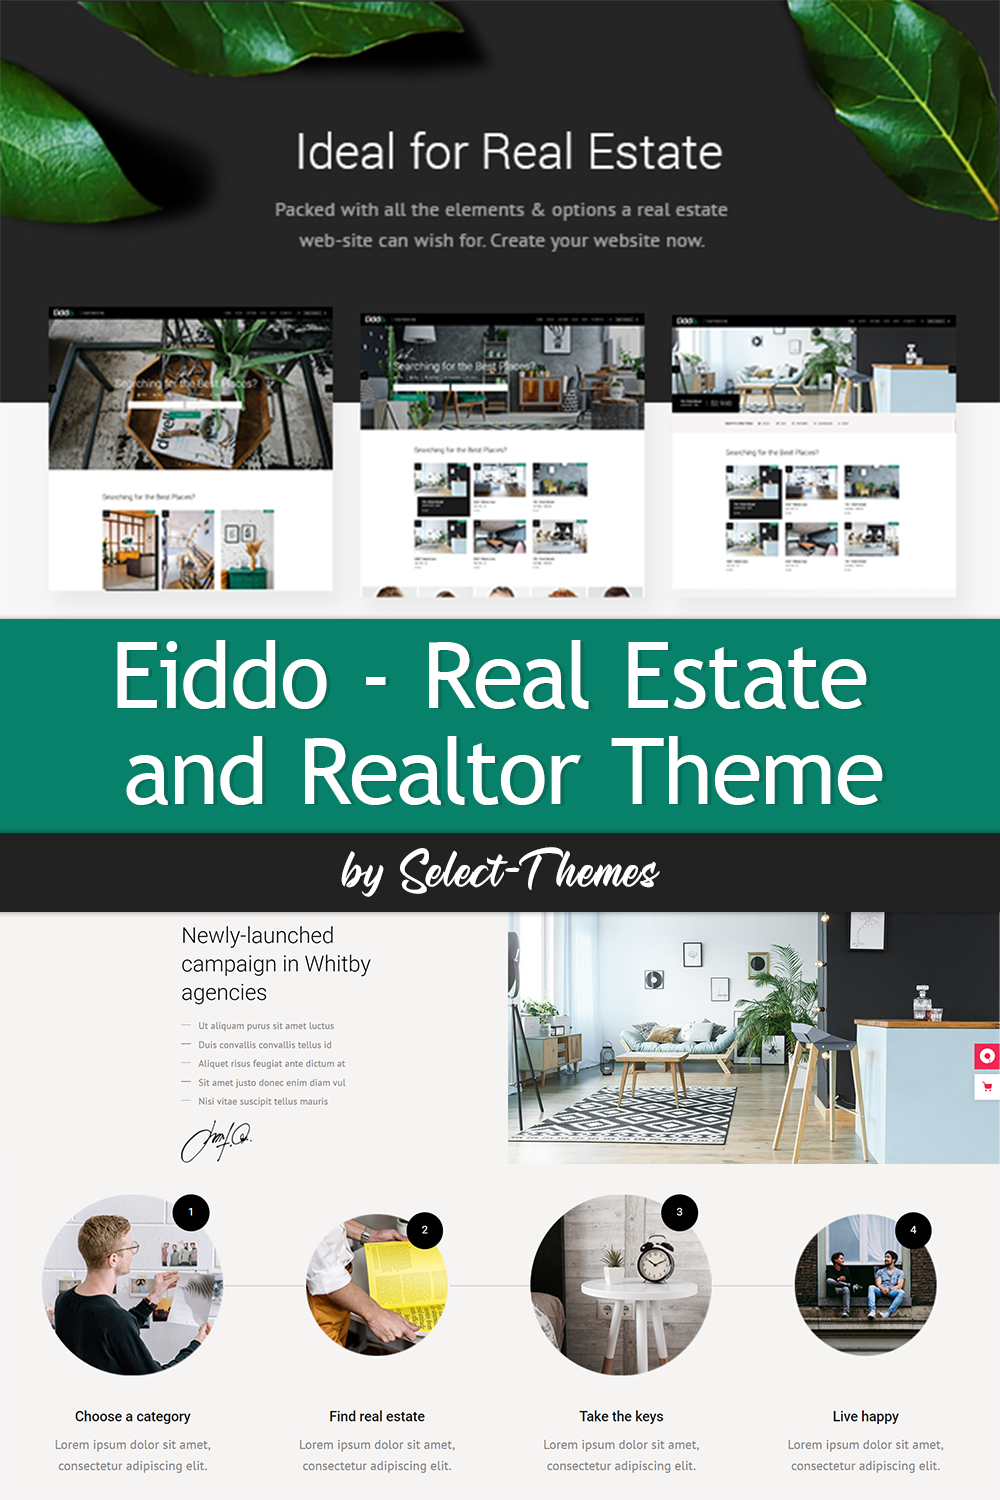 Illustrations eiddo real estate and realtor theme of pinterest.